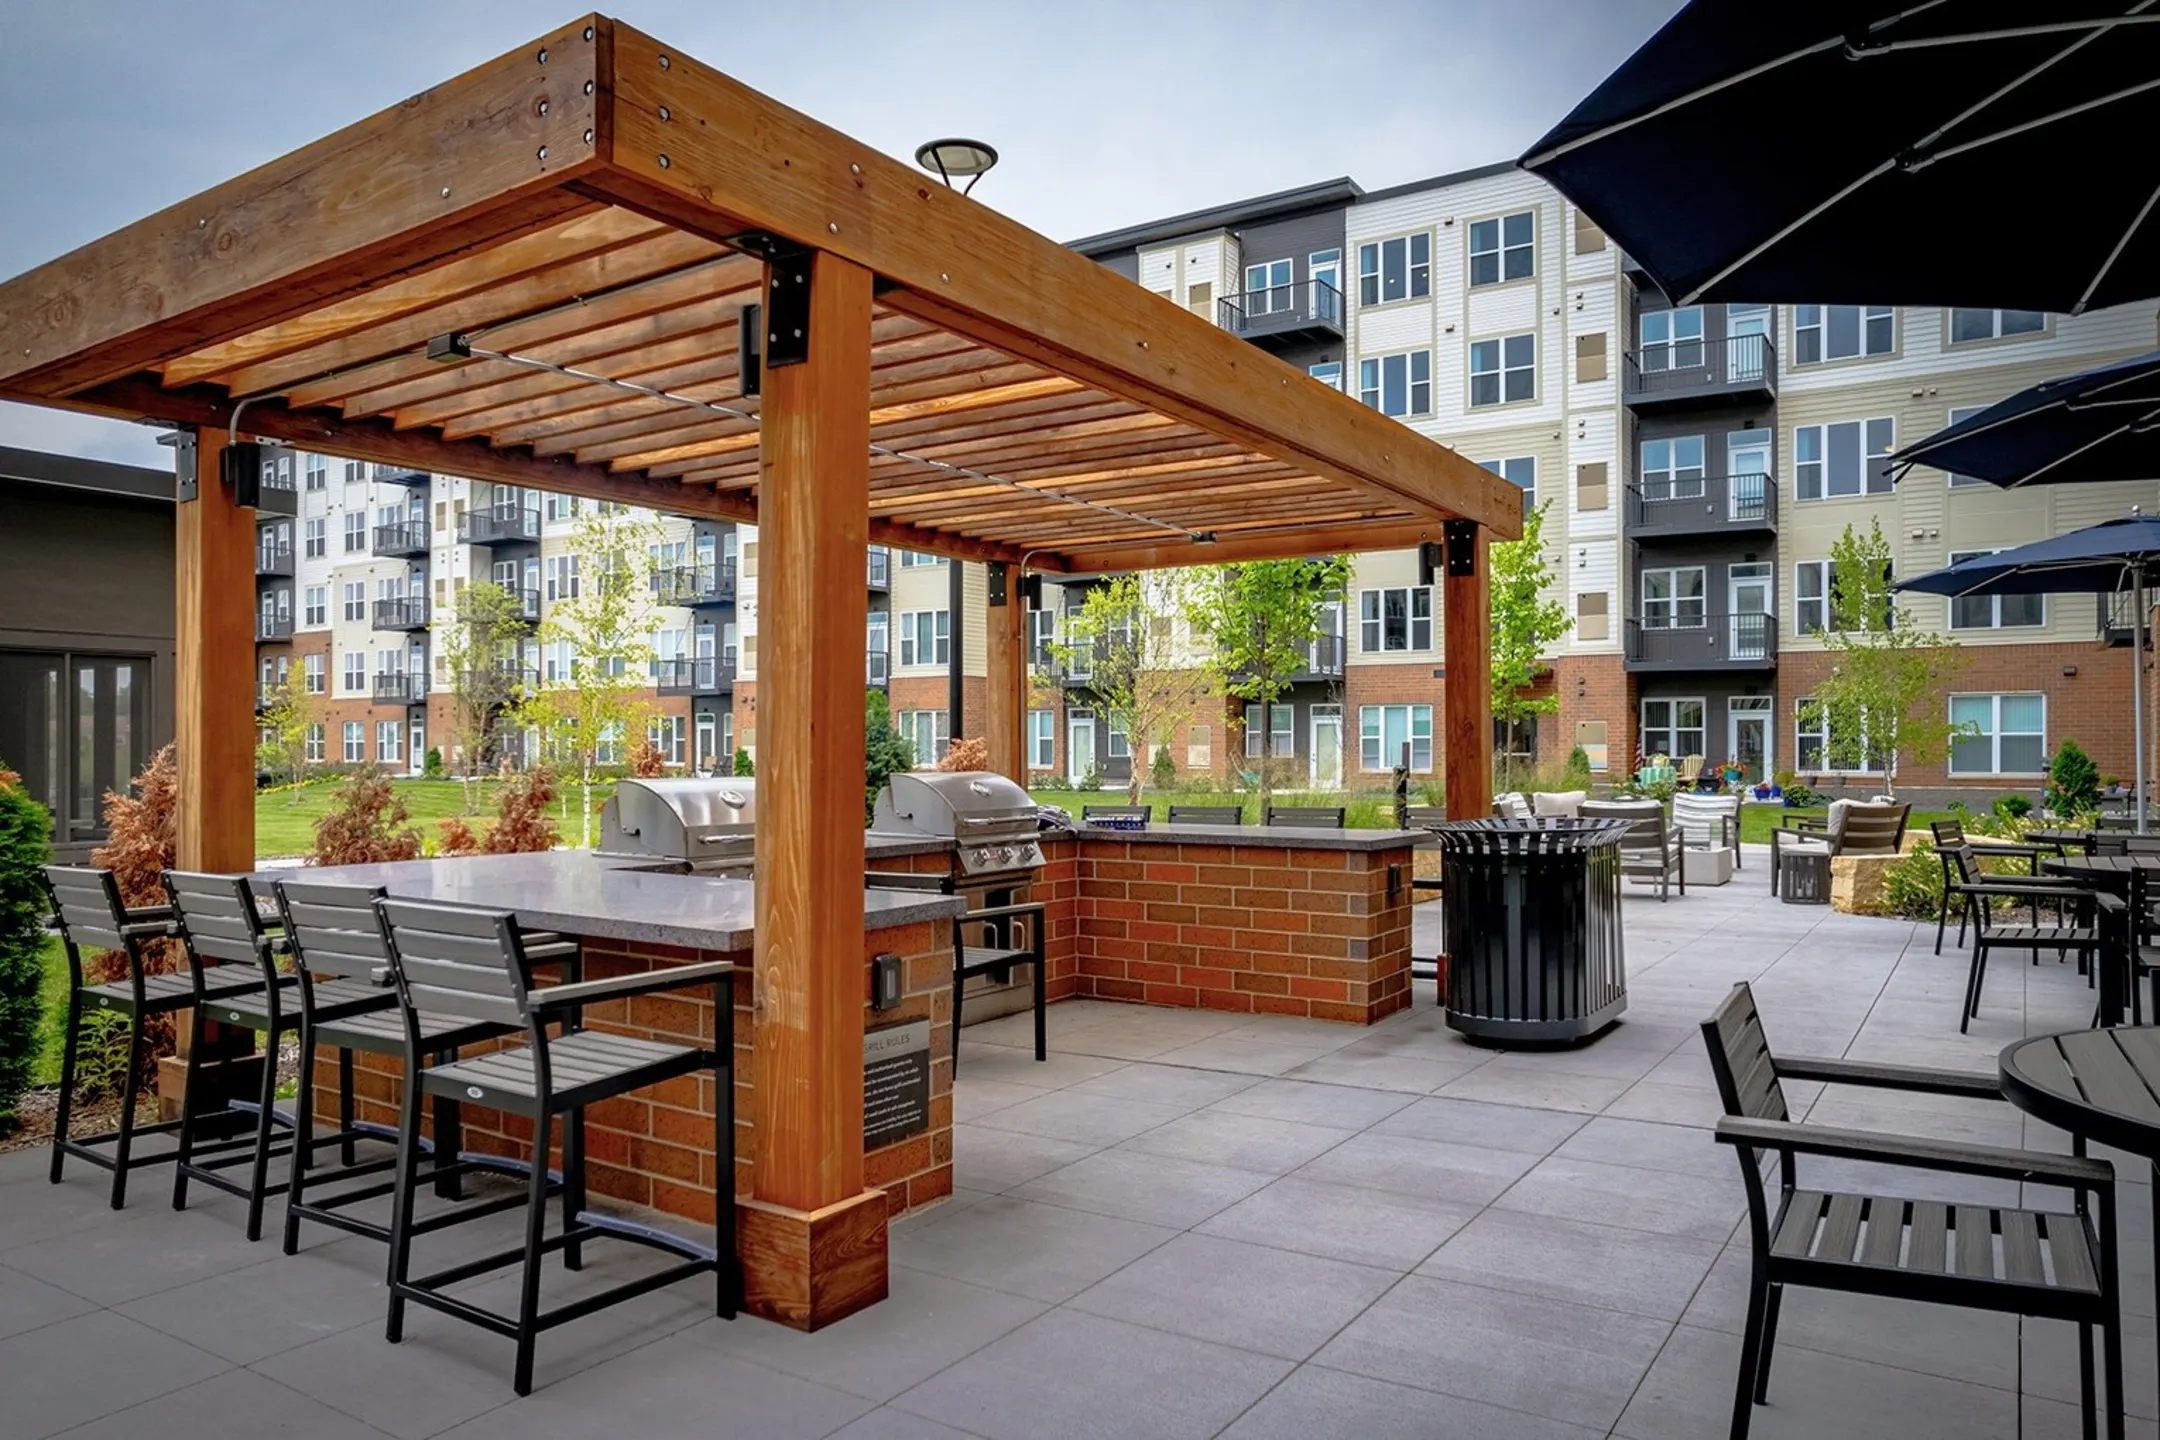 Patio / Deck - Legacy Commons at Signal Hills 55+ Apartments - West Saint Paul, MN